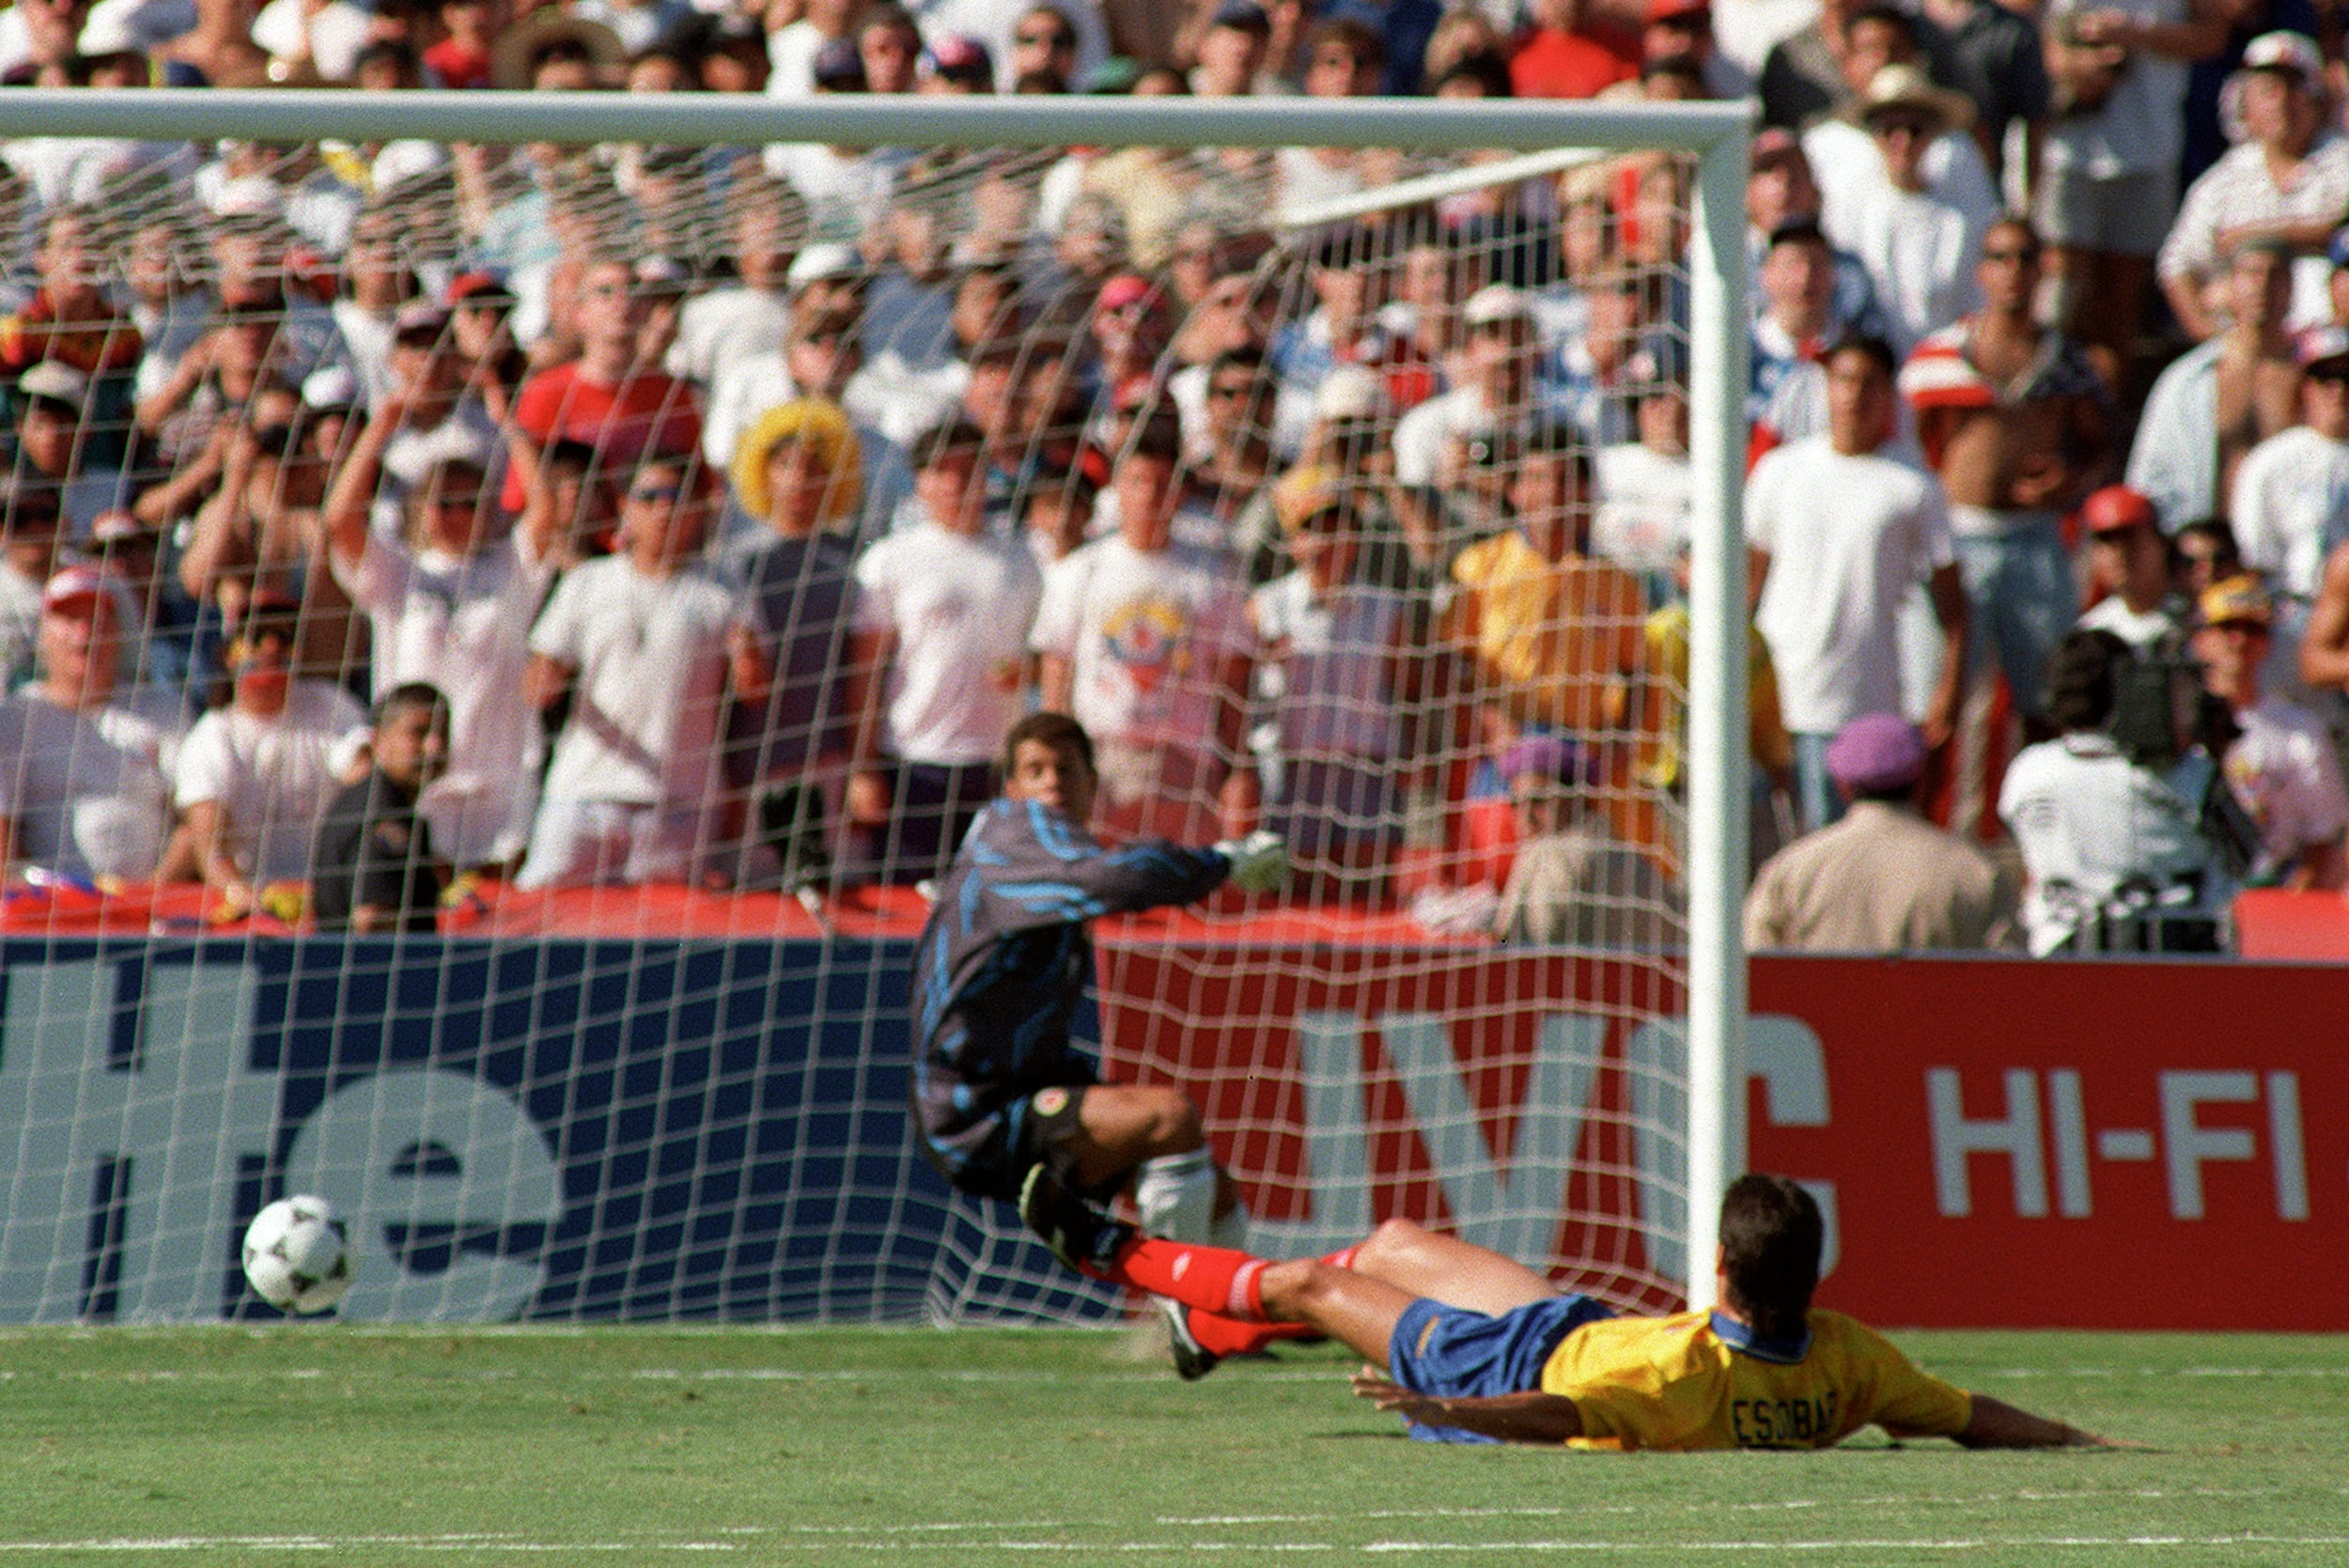 Colombian defender Andres Escobar lies on the ground after scoring an own goal past goalkeeper Oscar Cordoba while trying to stop a shot from US forward John Harkes during the World Cup first round soccer match between the United States and Colombia 22 June 1994 in Los Angeles. The United States beat Colombia 2-1. AFP PHOTO/ROMEO GACAD (Photo by Romeo GACAD / AFP) (Photo by ROMEO GACAD/AFP via Getty Images)